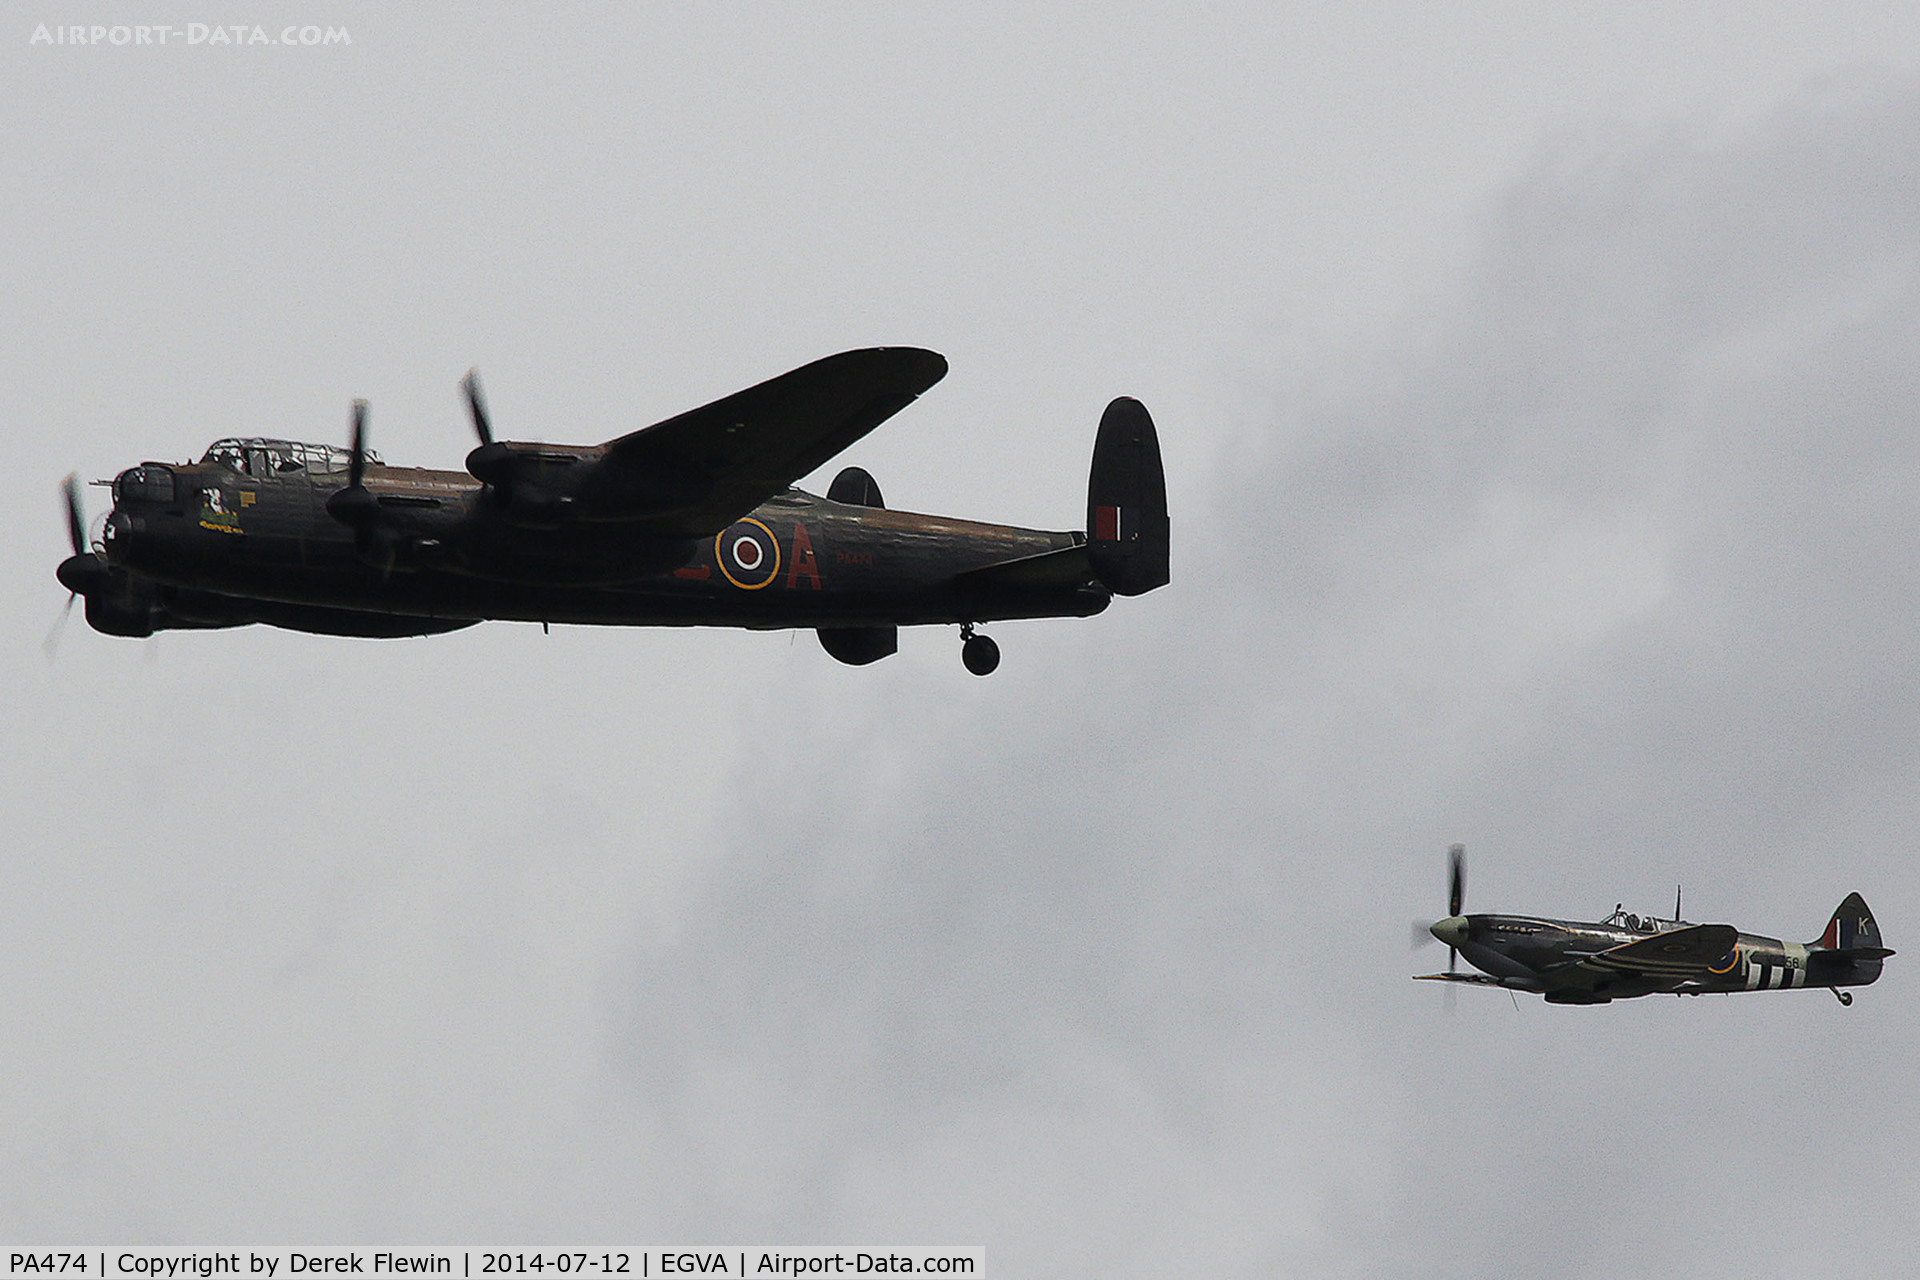 PA474, 1945 Avro 683 Lancaster B1 C/N VACH0052/D2973, RIAT 2014, Lancaster B1, seen leading Spitfire LF.IXc, of the Battle of Britain Memorial Flight, overflying the Domestc Site at RAF Fairford.